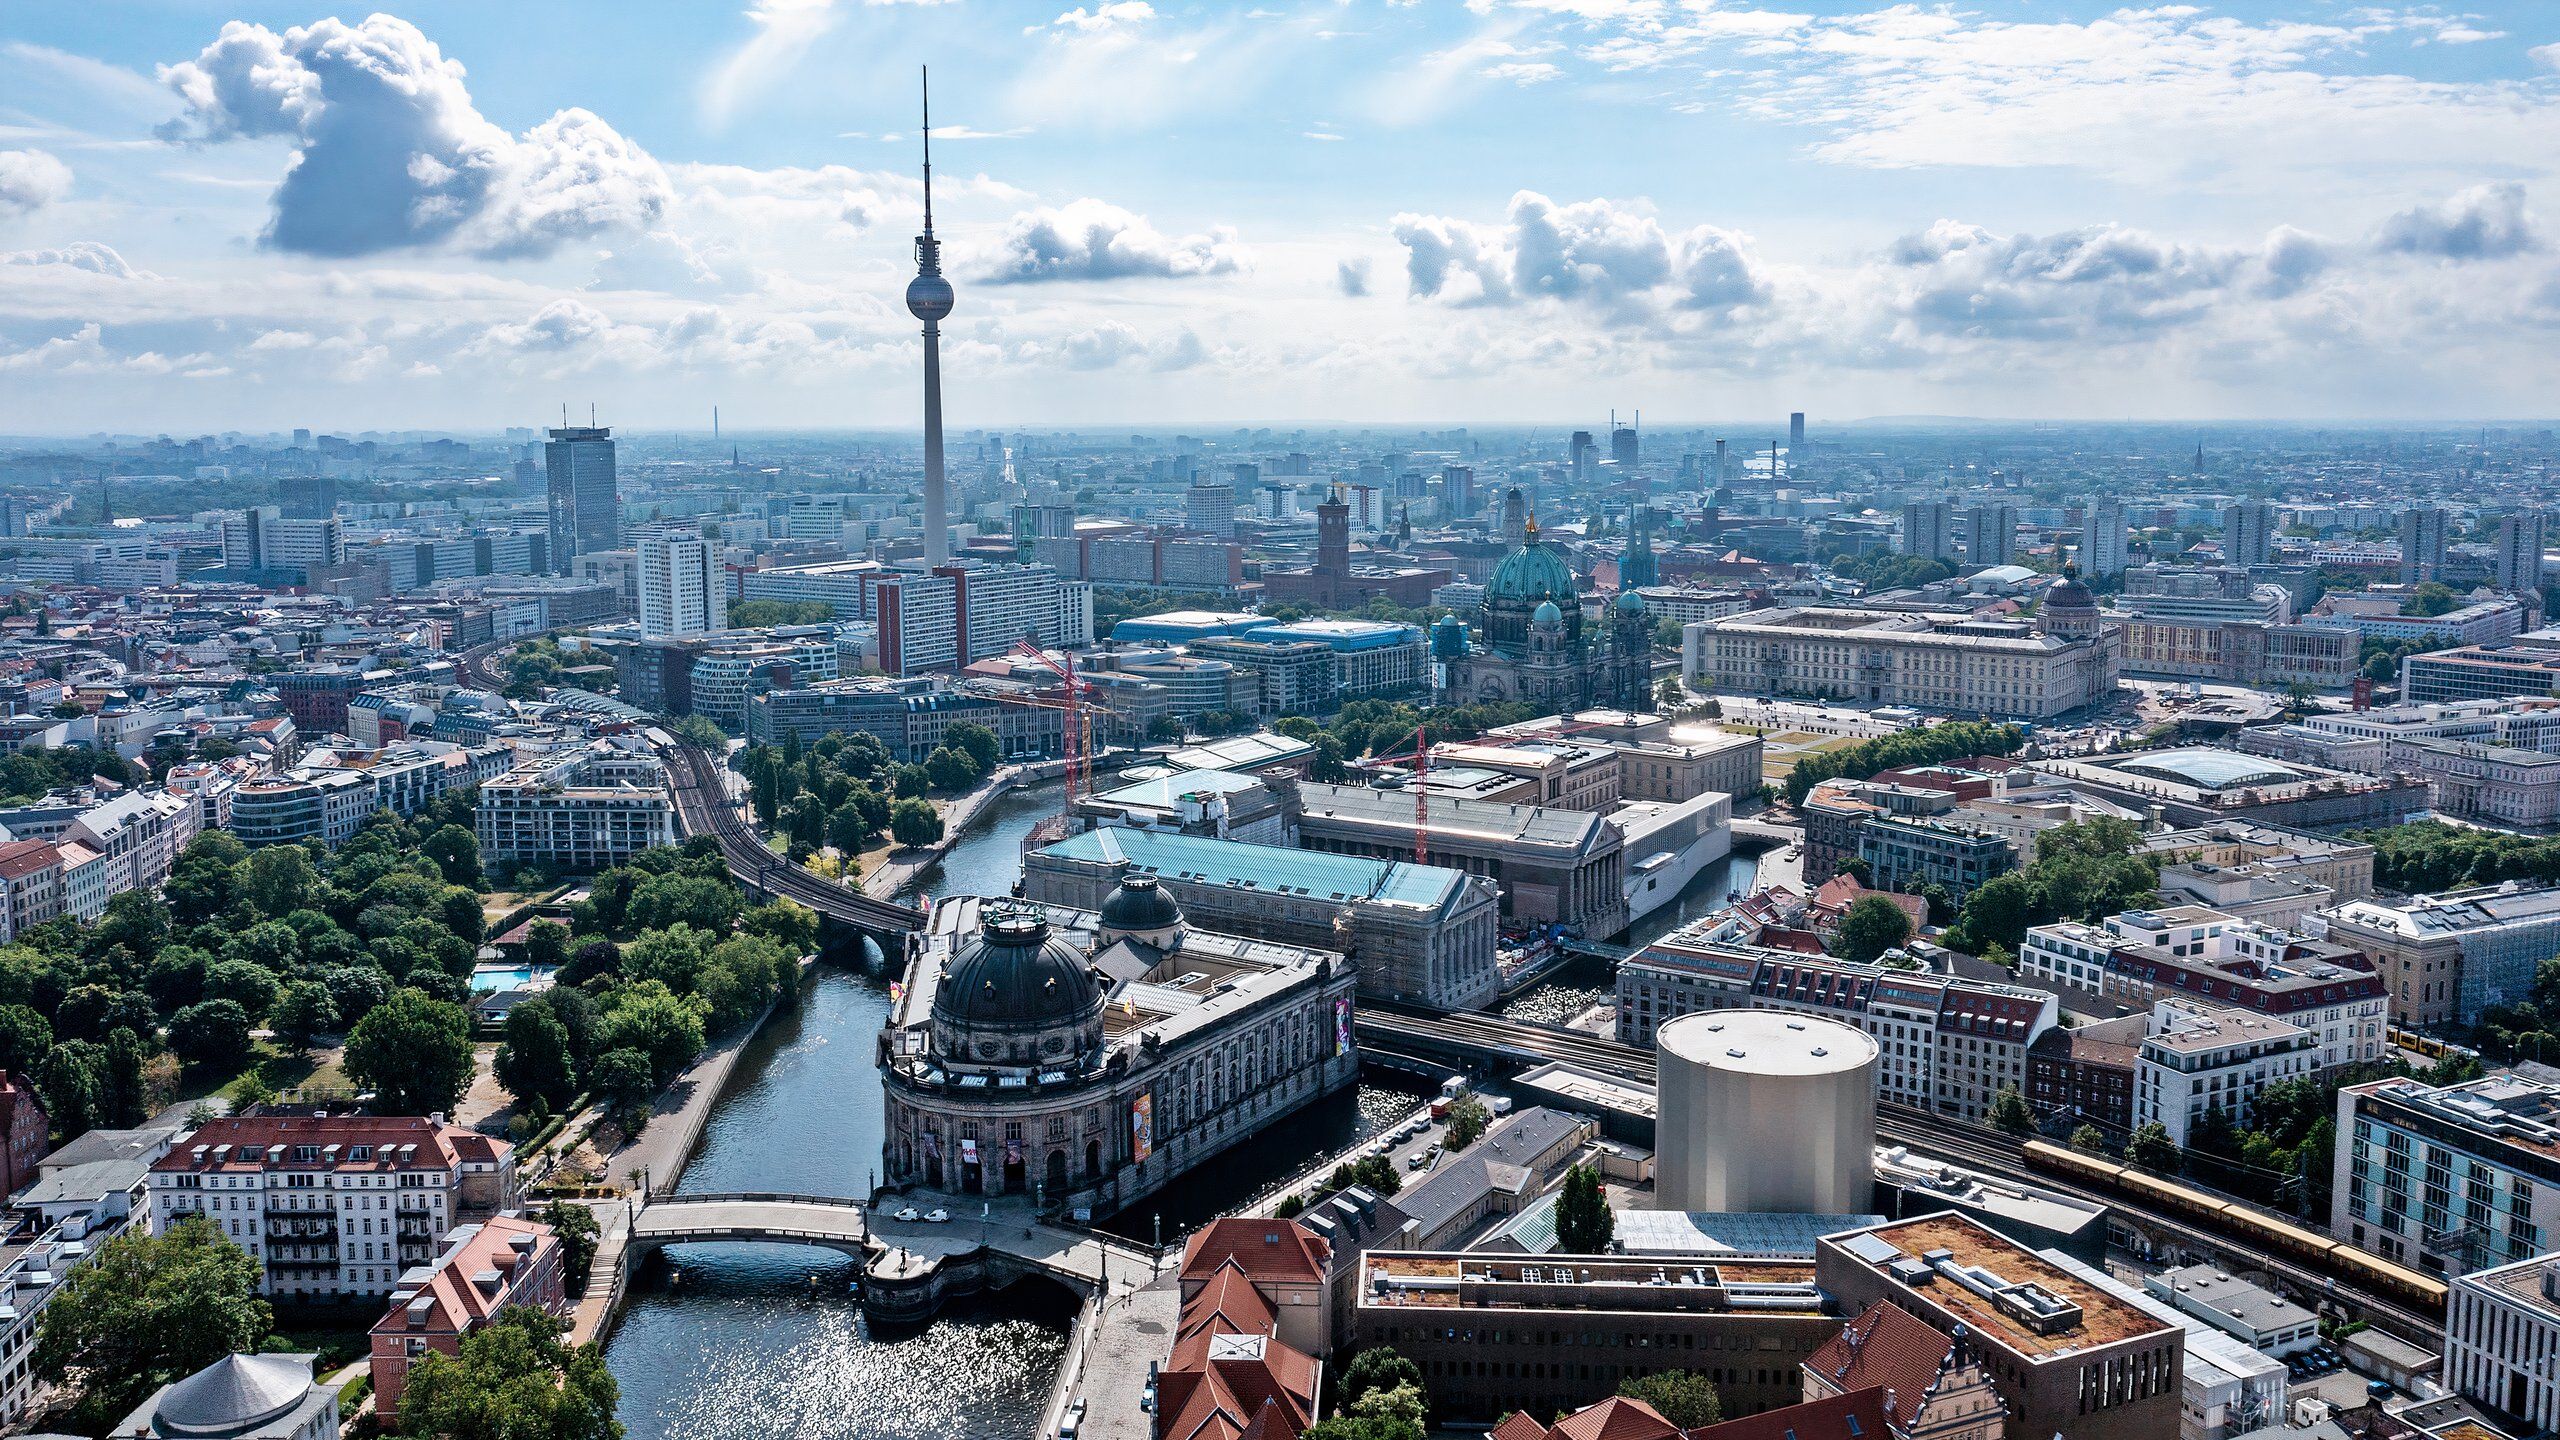 View of the Museum Island in Berlin, Germany.